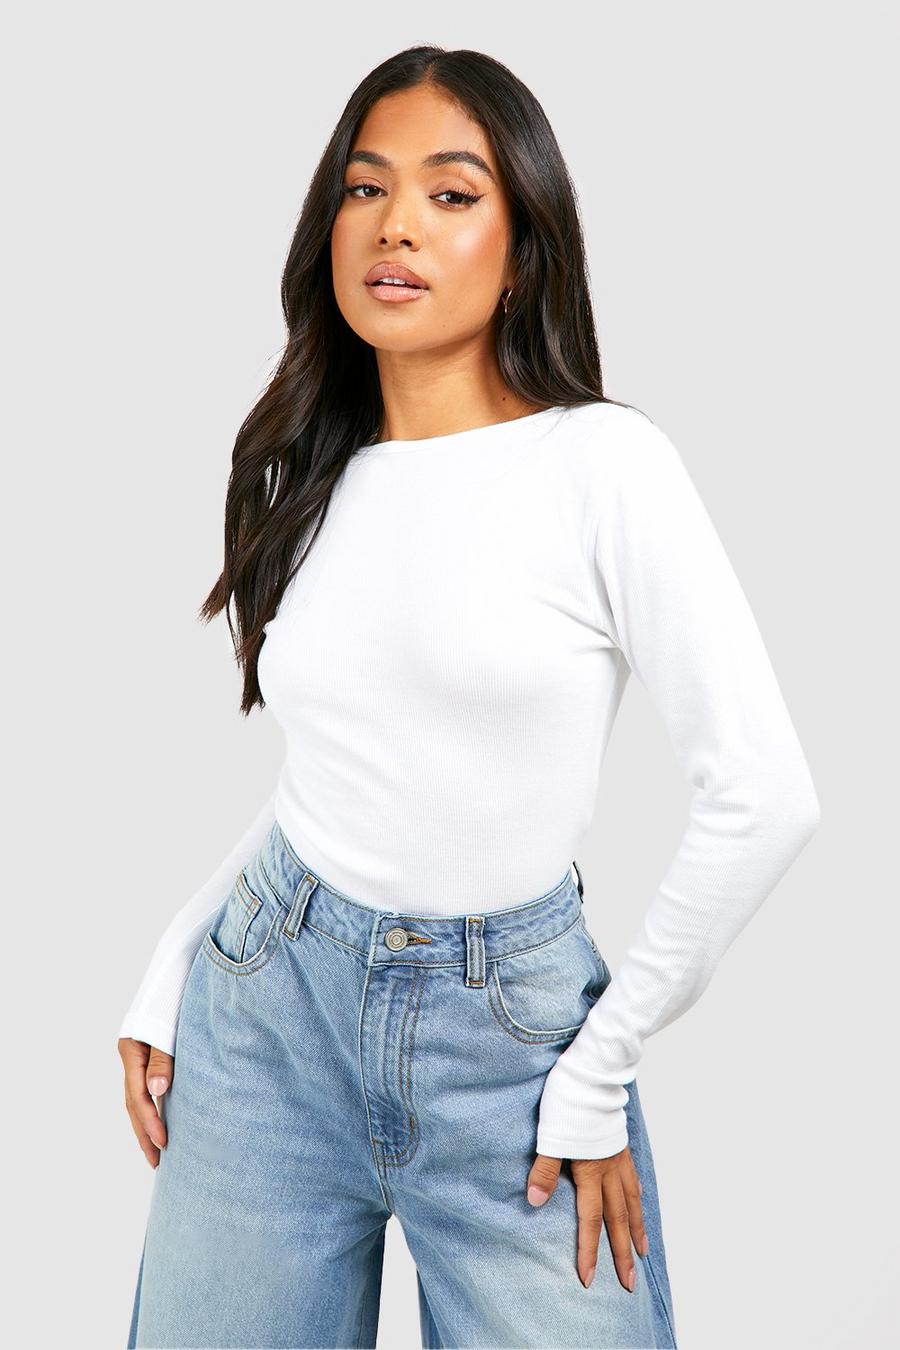 Buy Boohoo Long Sleeves Zip Front Knitted Ribbed Bodysuit Top In White